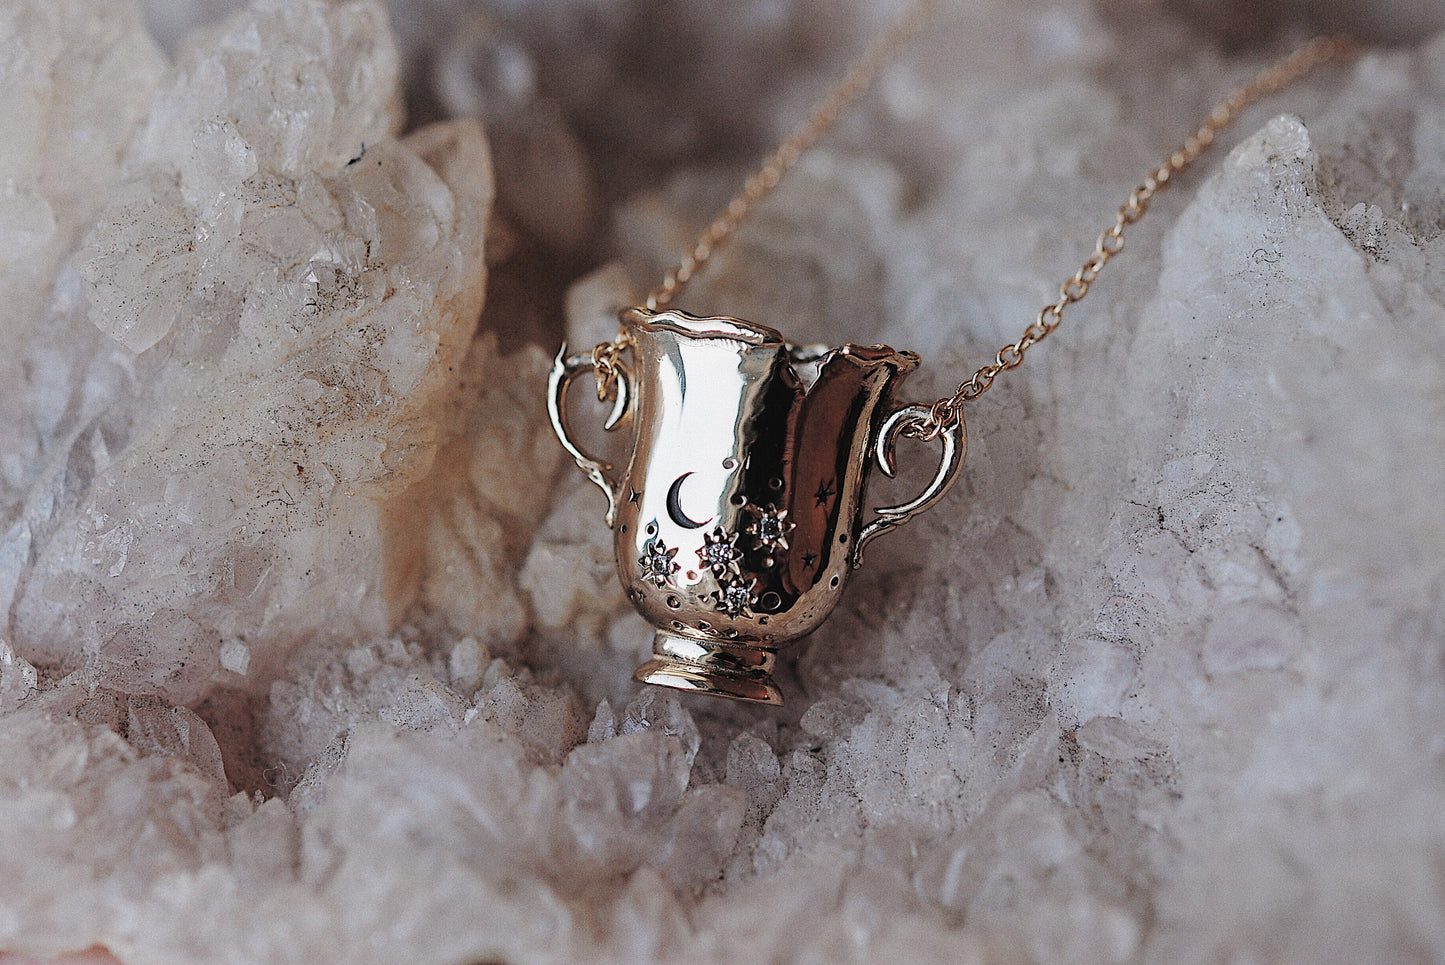 Her Cup of Stars Necklace